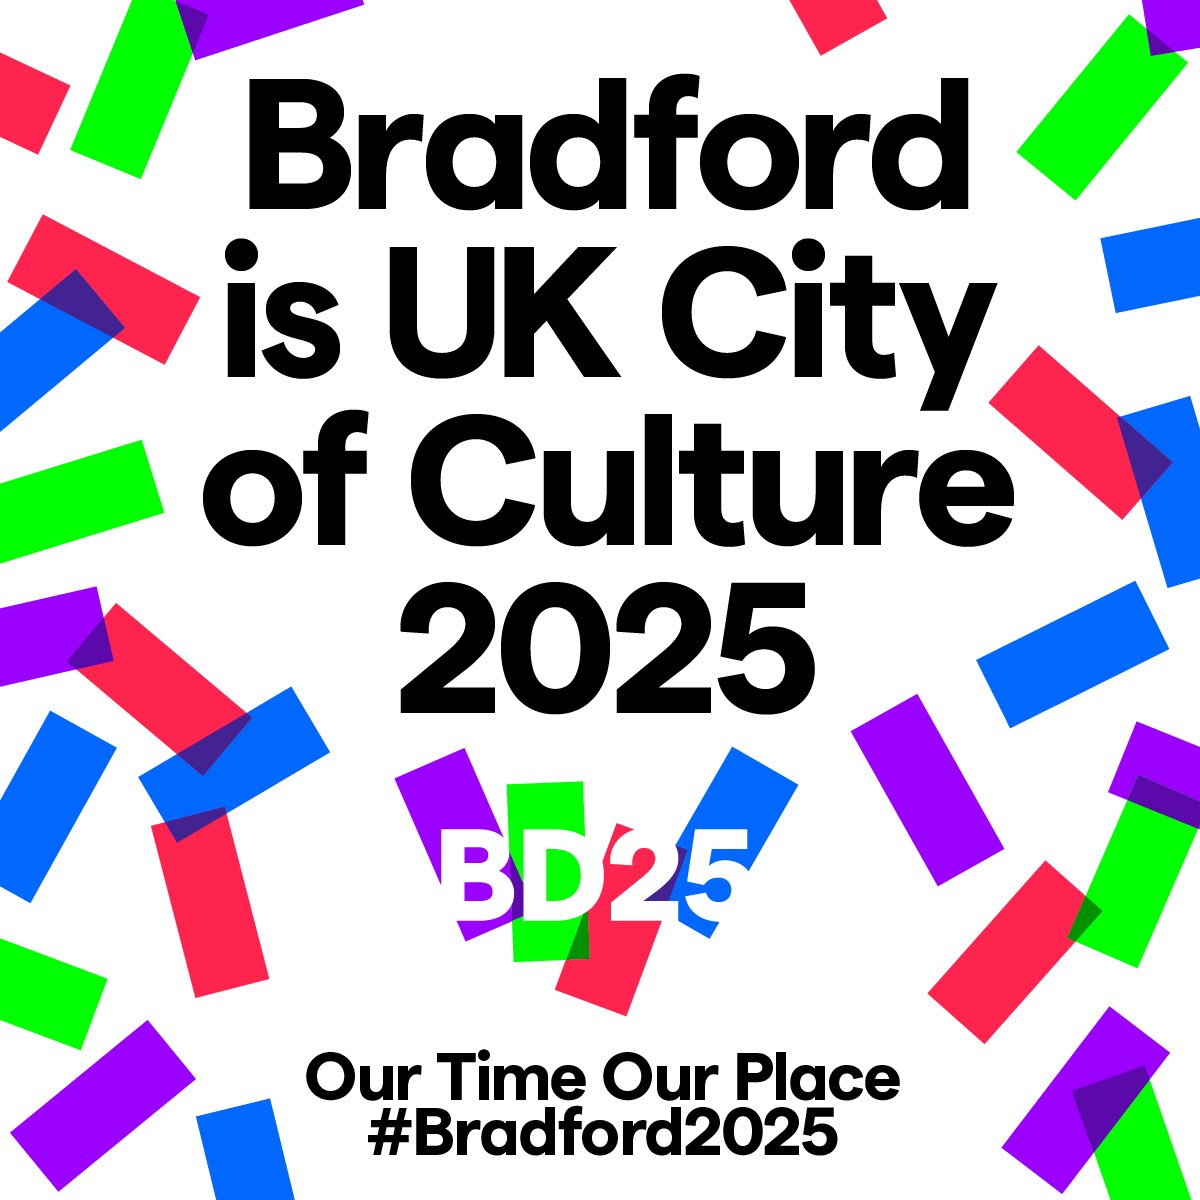 We are thrilled that #Bradford2025 has been named #CityofCulture2025! Our compelling bid generated an enormous amount of energy and support, and thoroughly deserved to be recognised by the judges. This is our time!